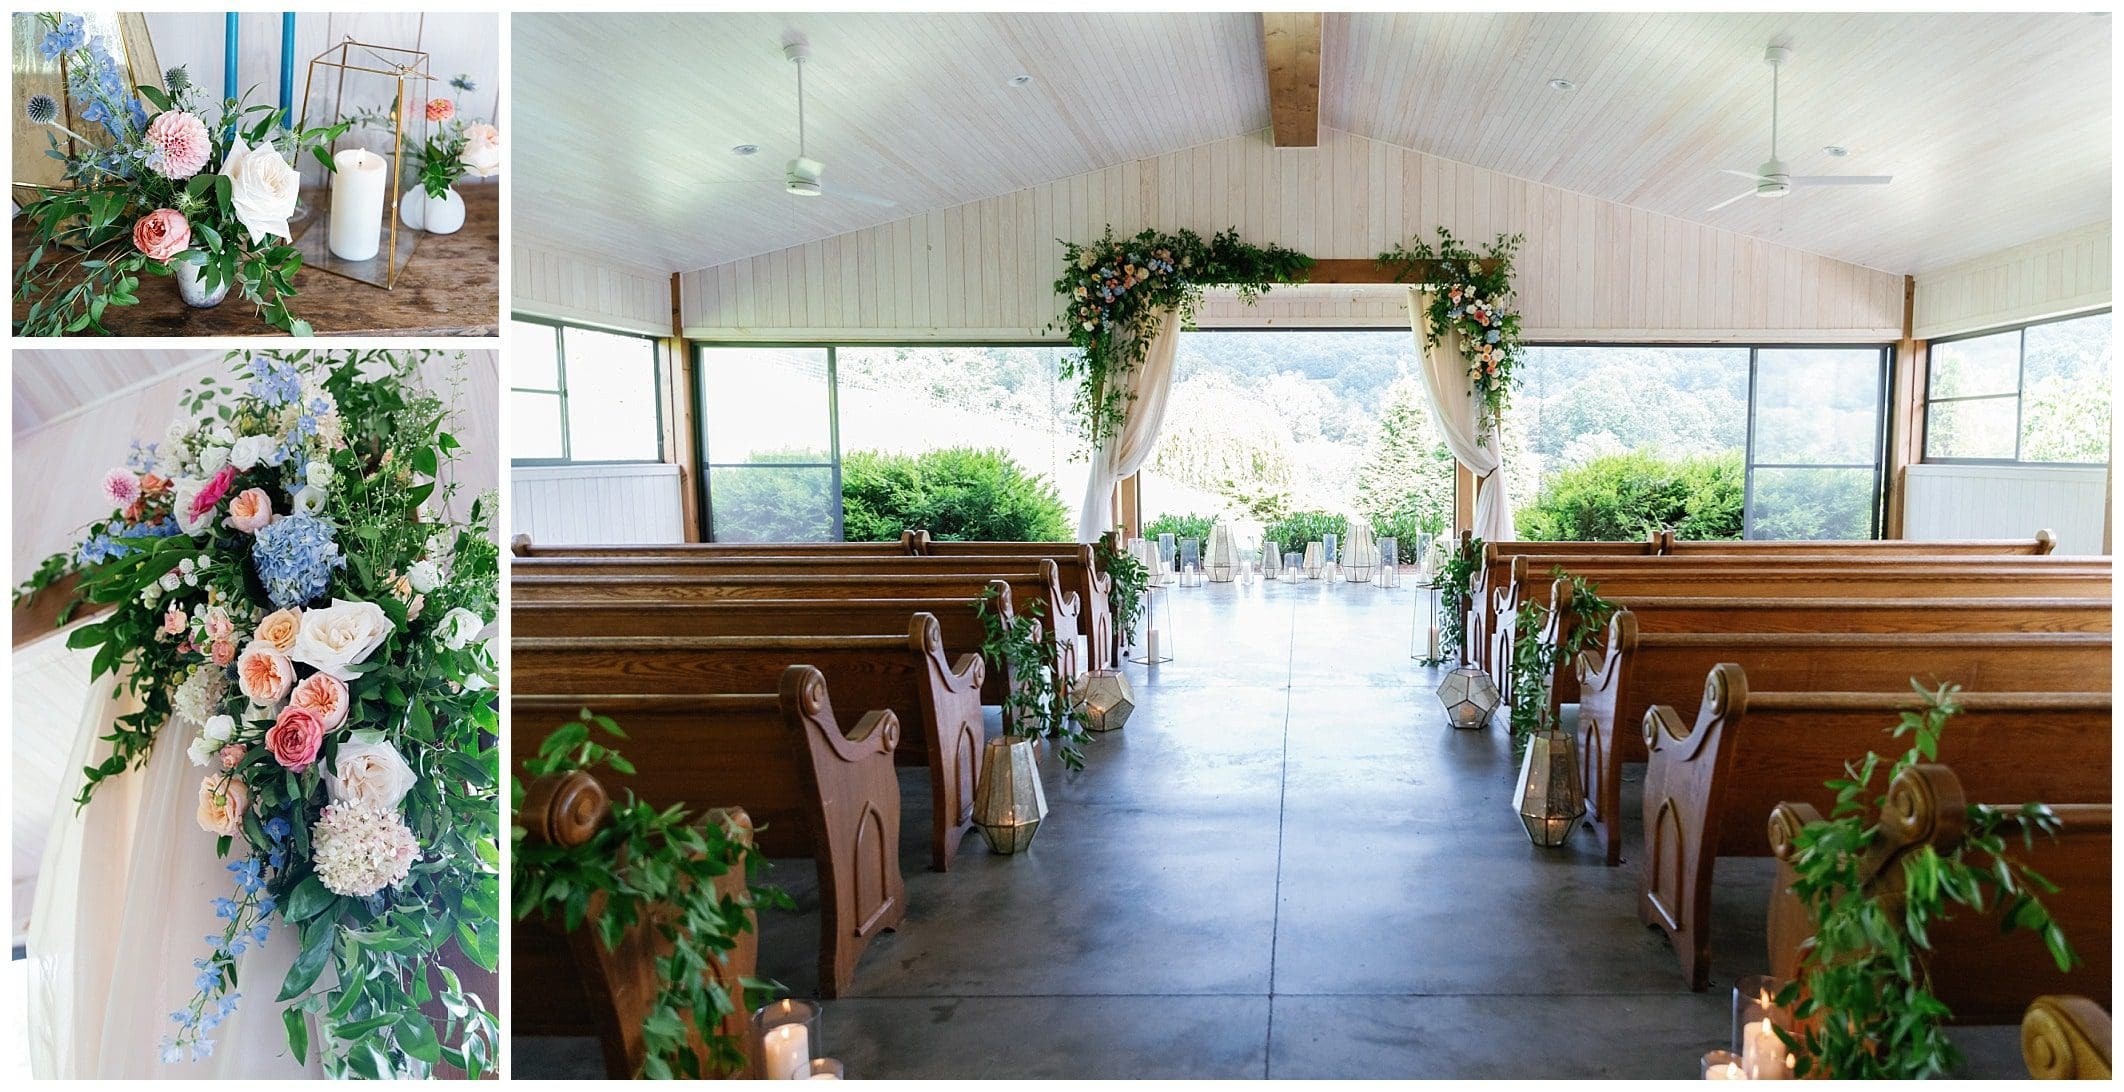 A wedding ceremony with flowers and pews.